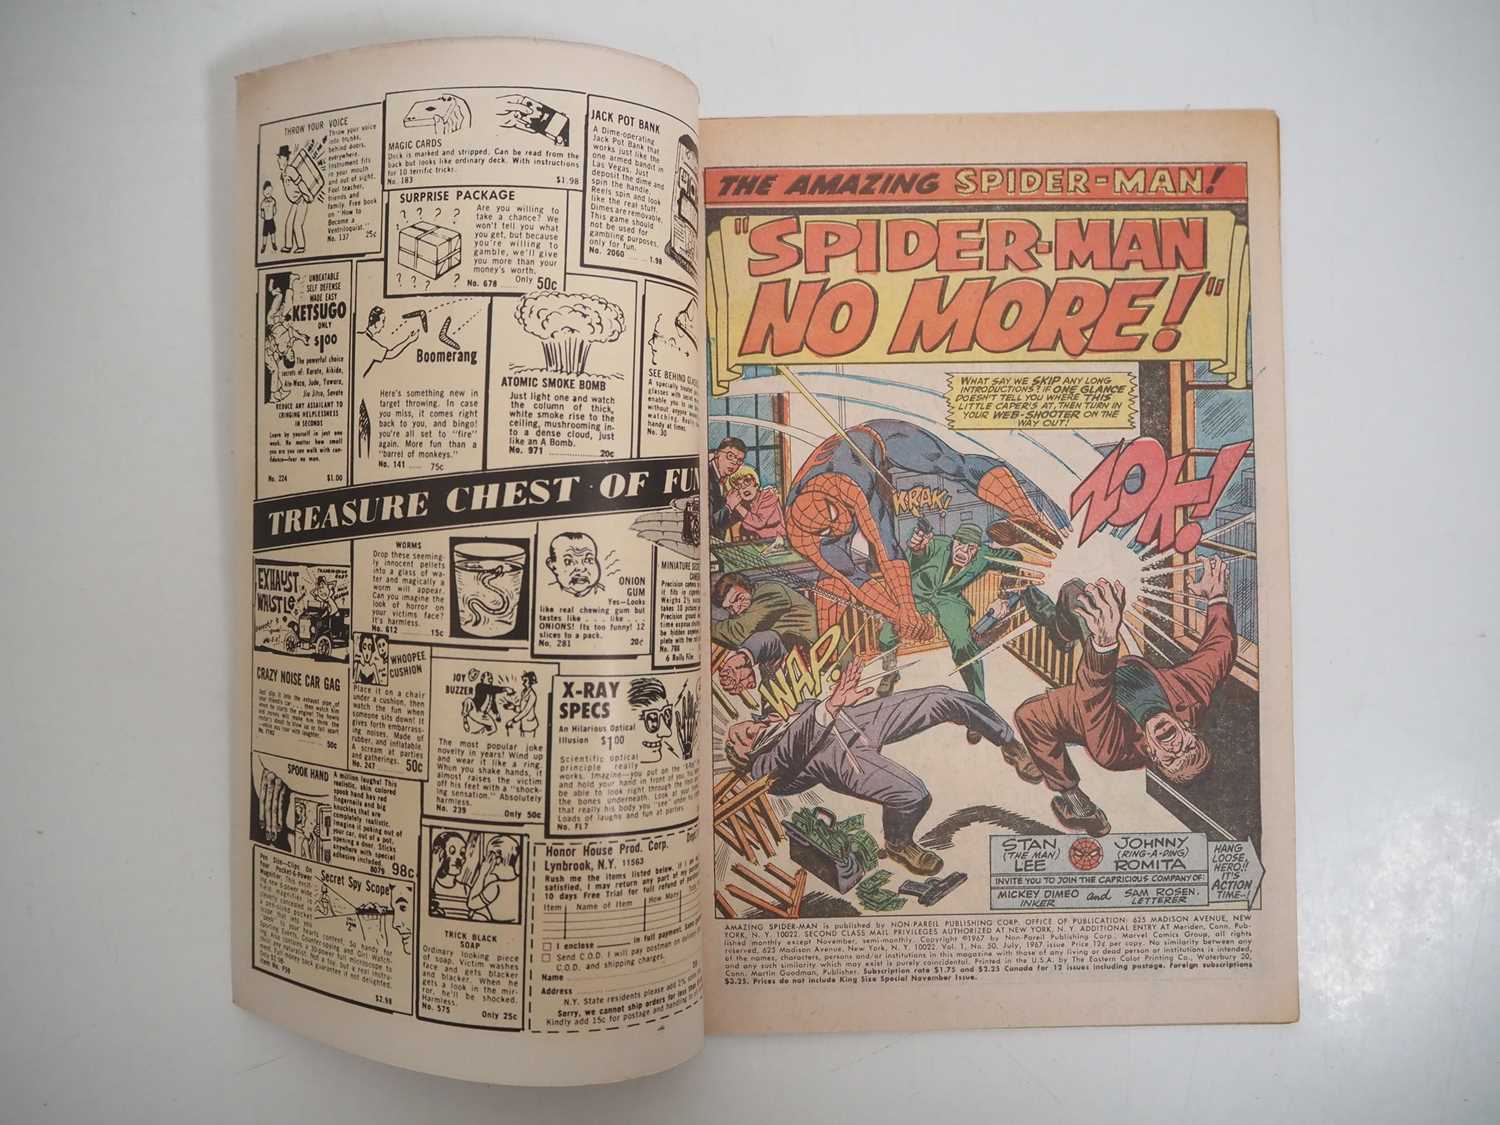 AMAZING SPIDER-MAN #50 - (1967 - MARVEL - UK Price Variant) - RED HOT KEY Book & Character + With - Image 7 of 32